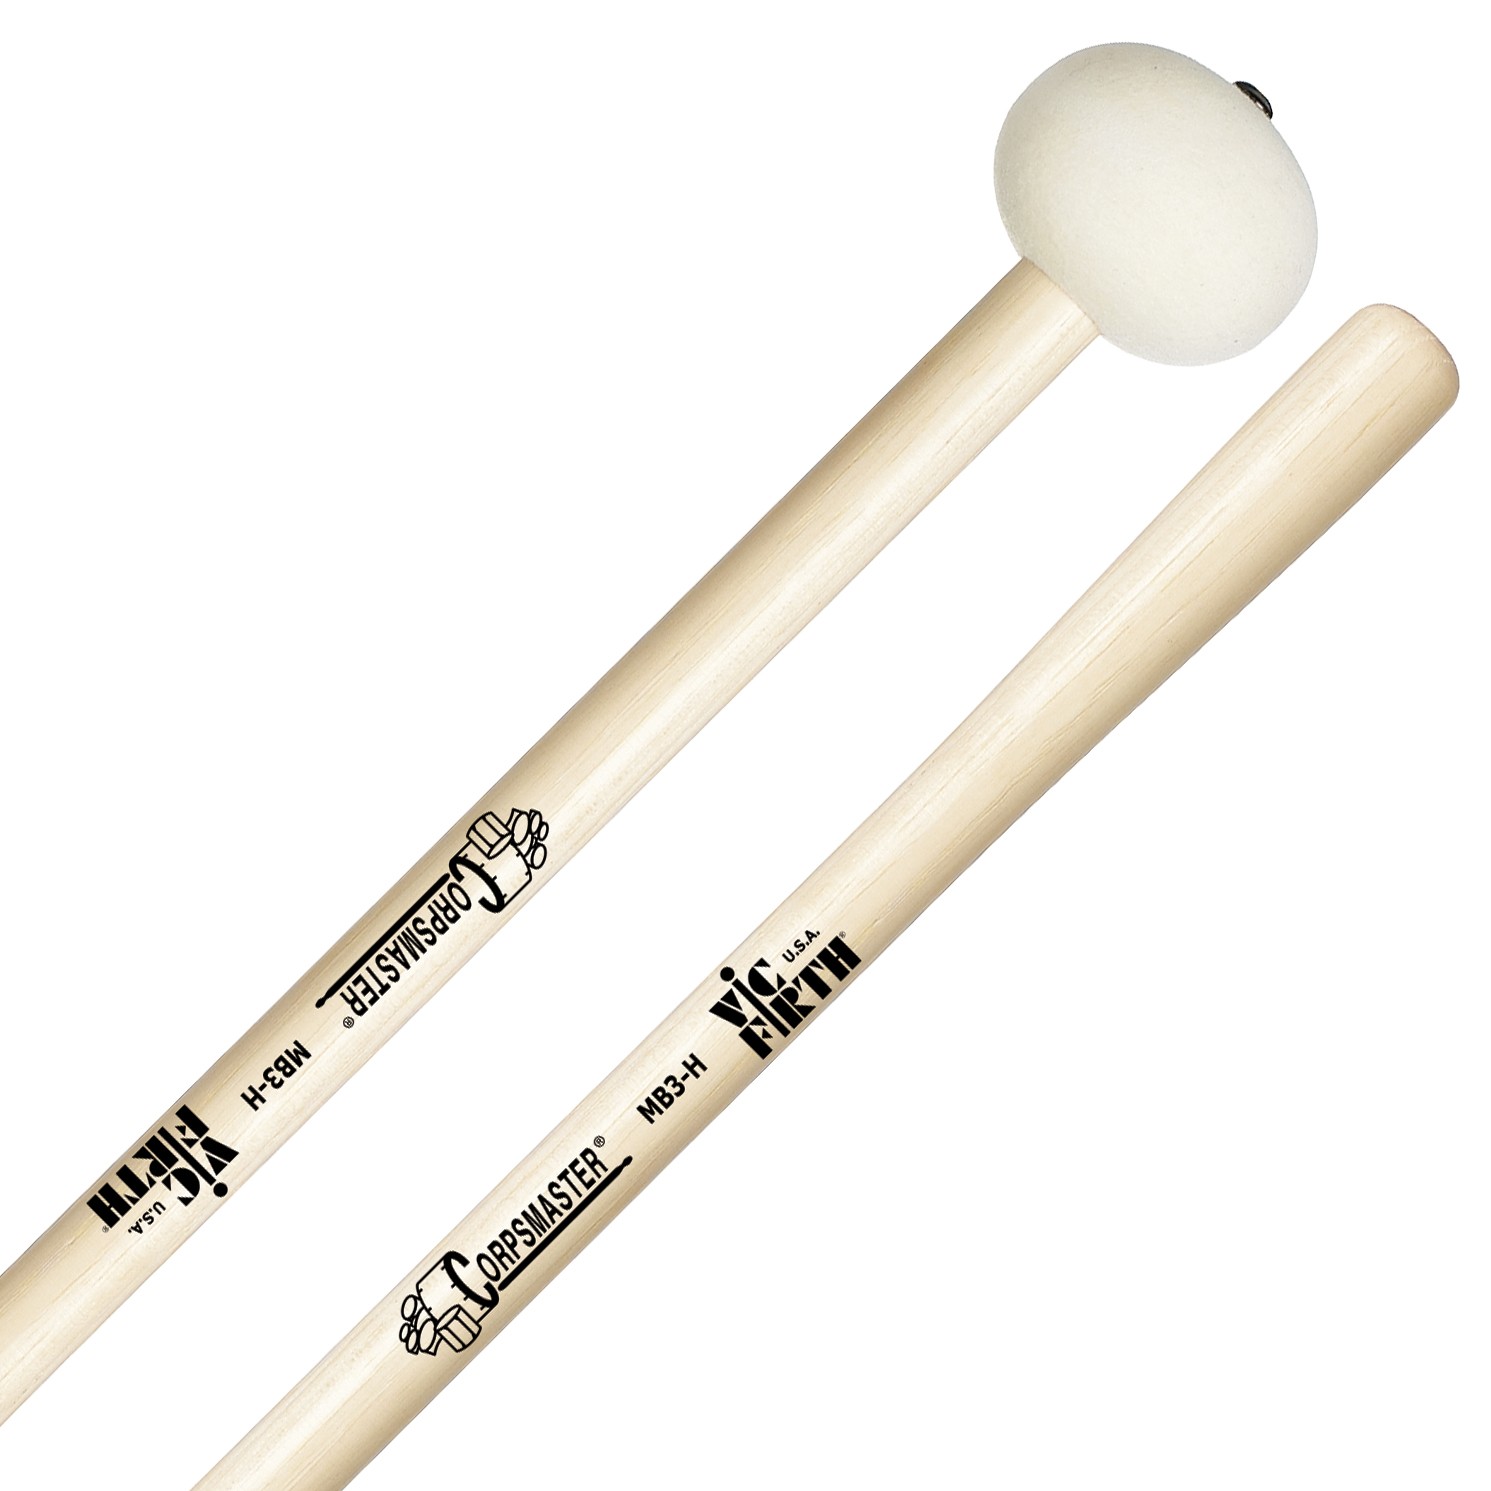 Vic Firth MB3H Corpsmaster Large Hard Felt Marching Bass mallets